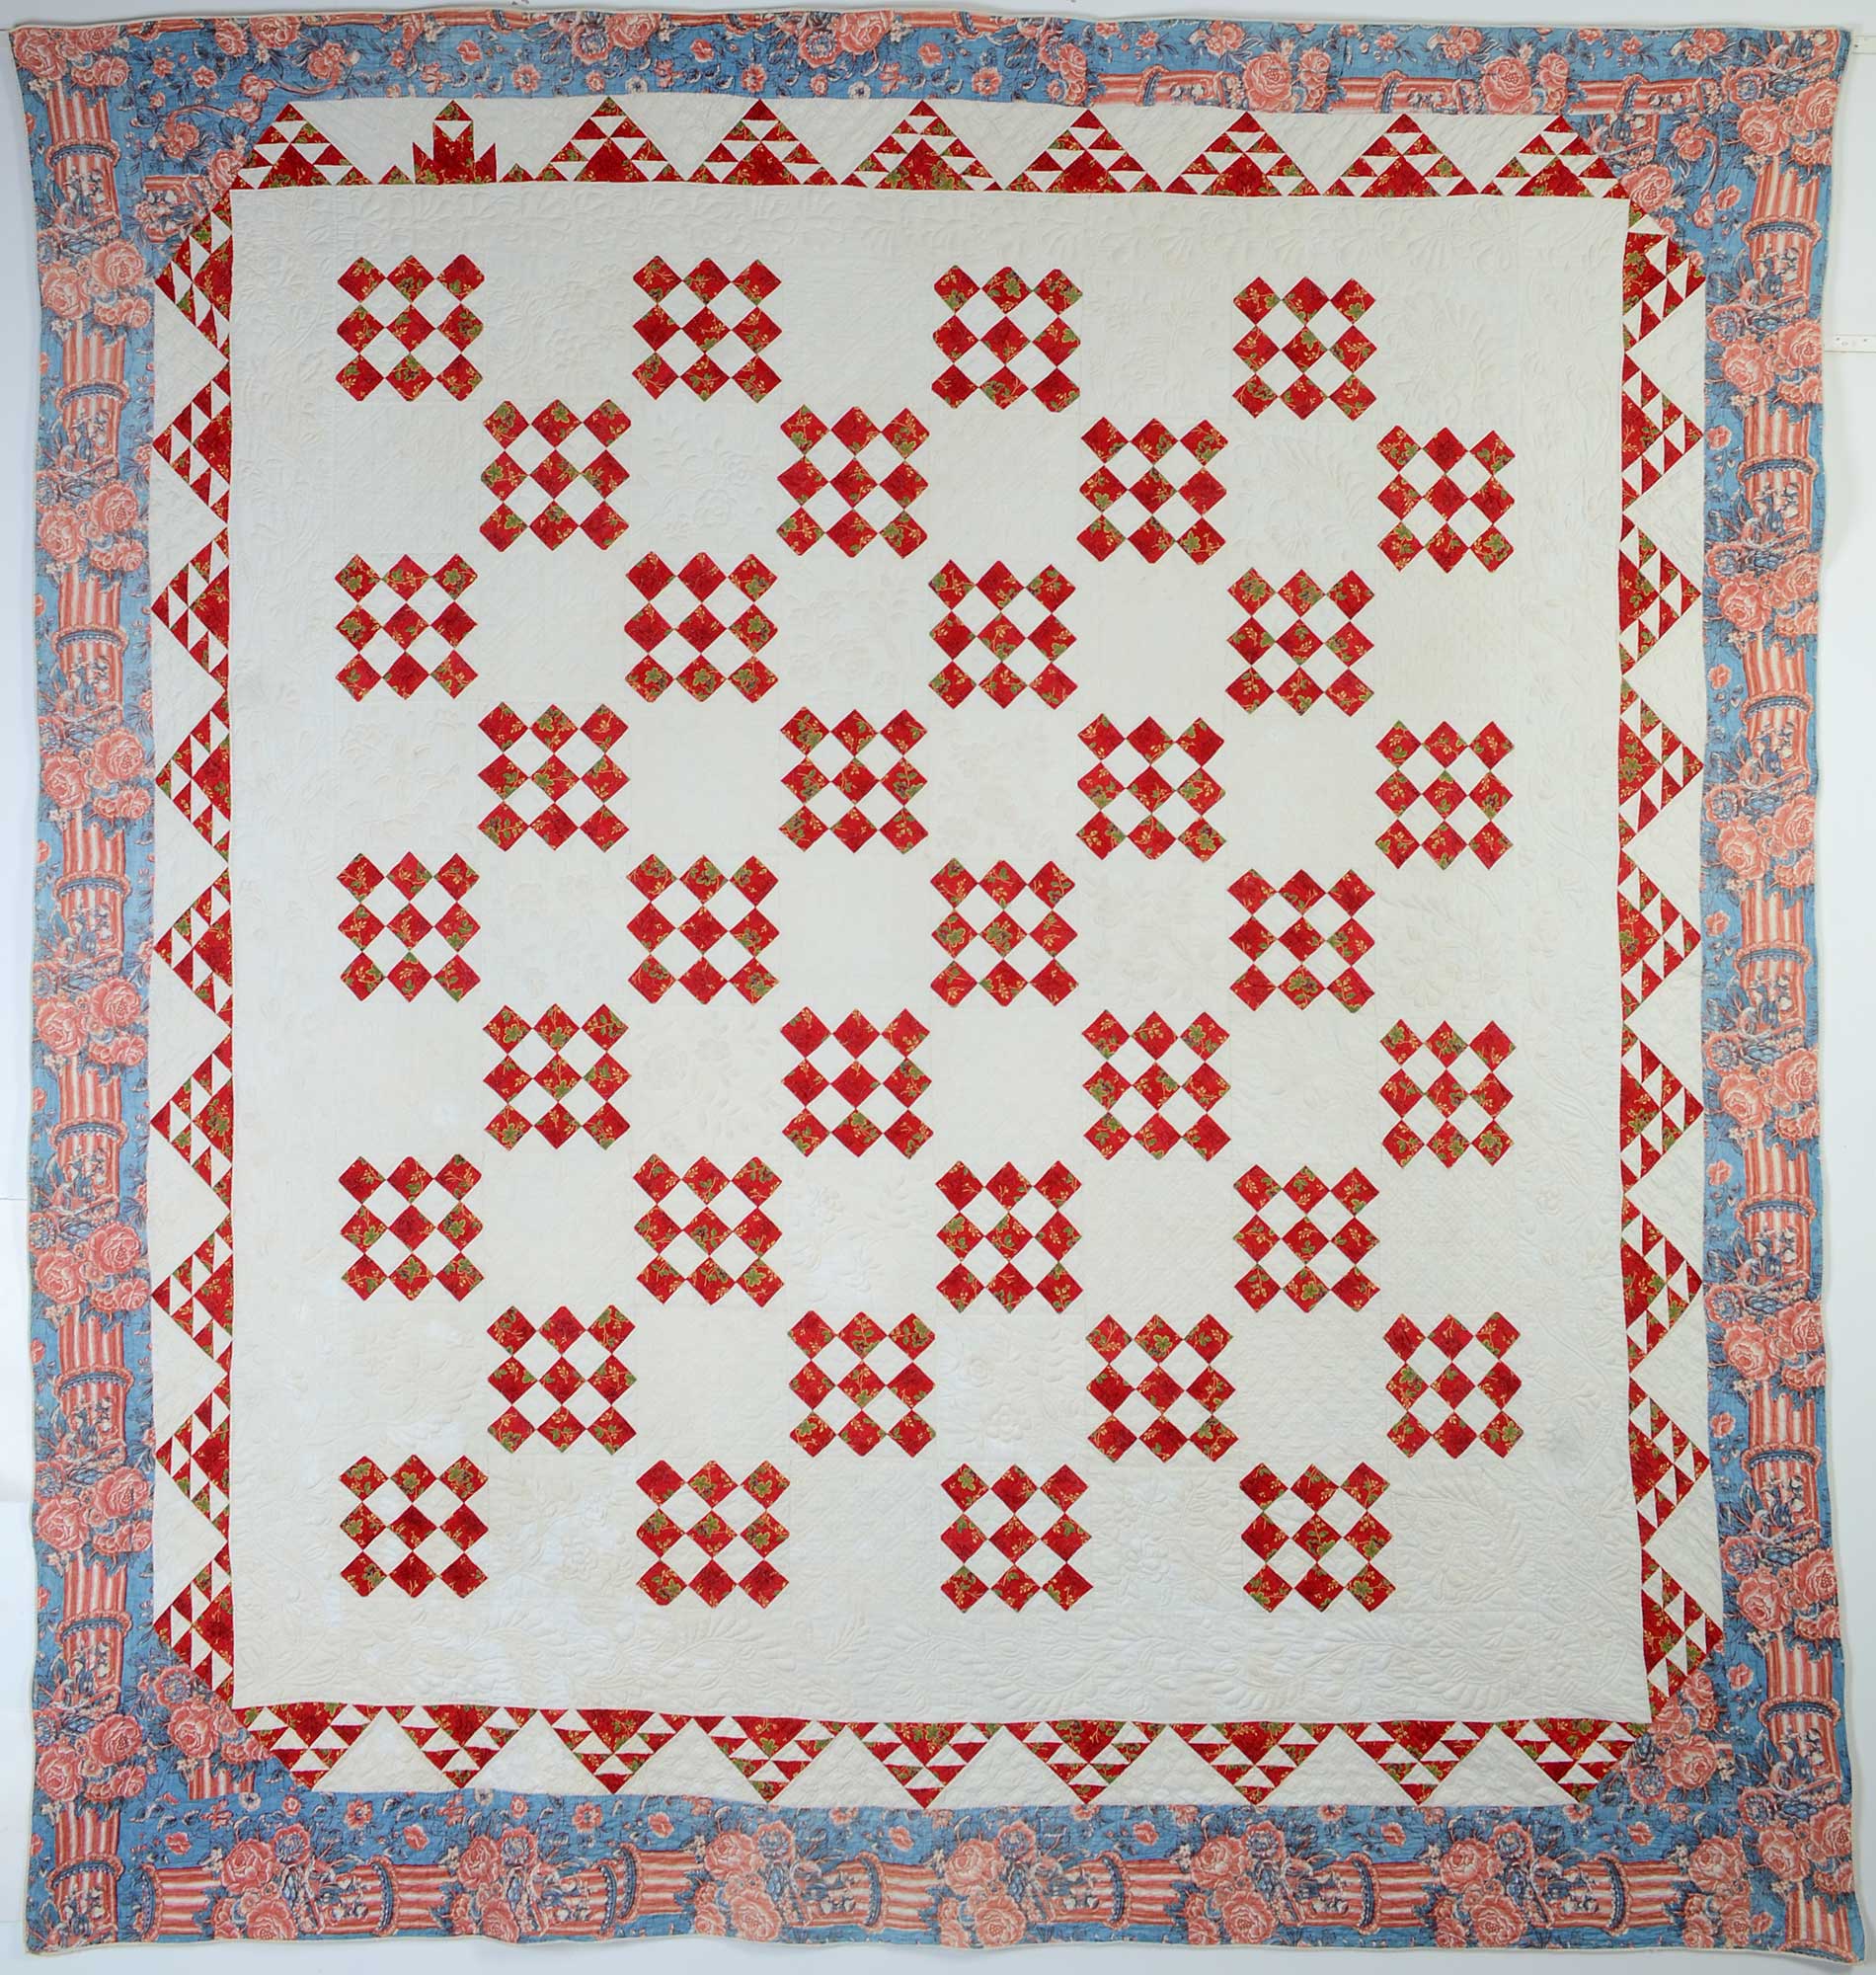 Nine Patch Quilt with Trapunto